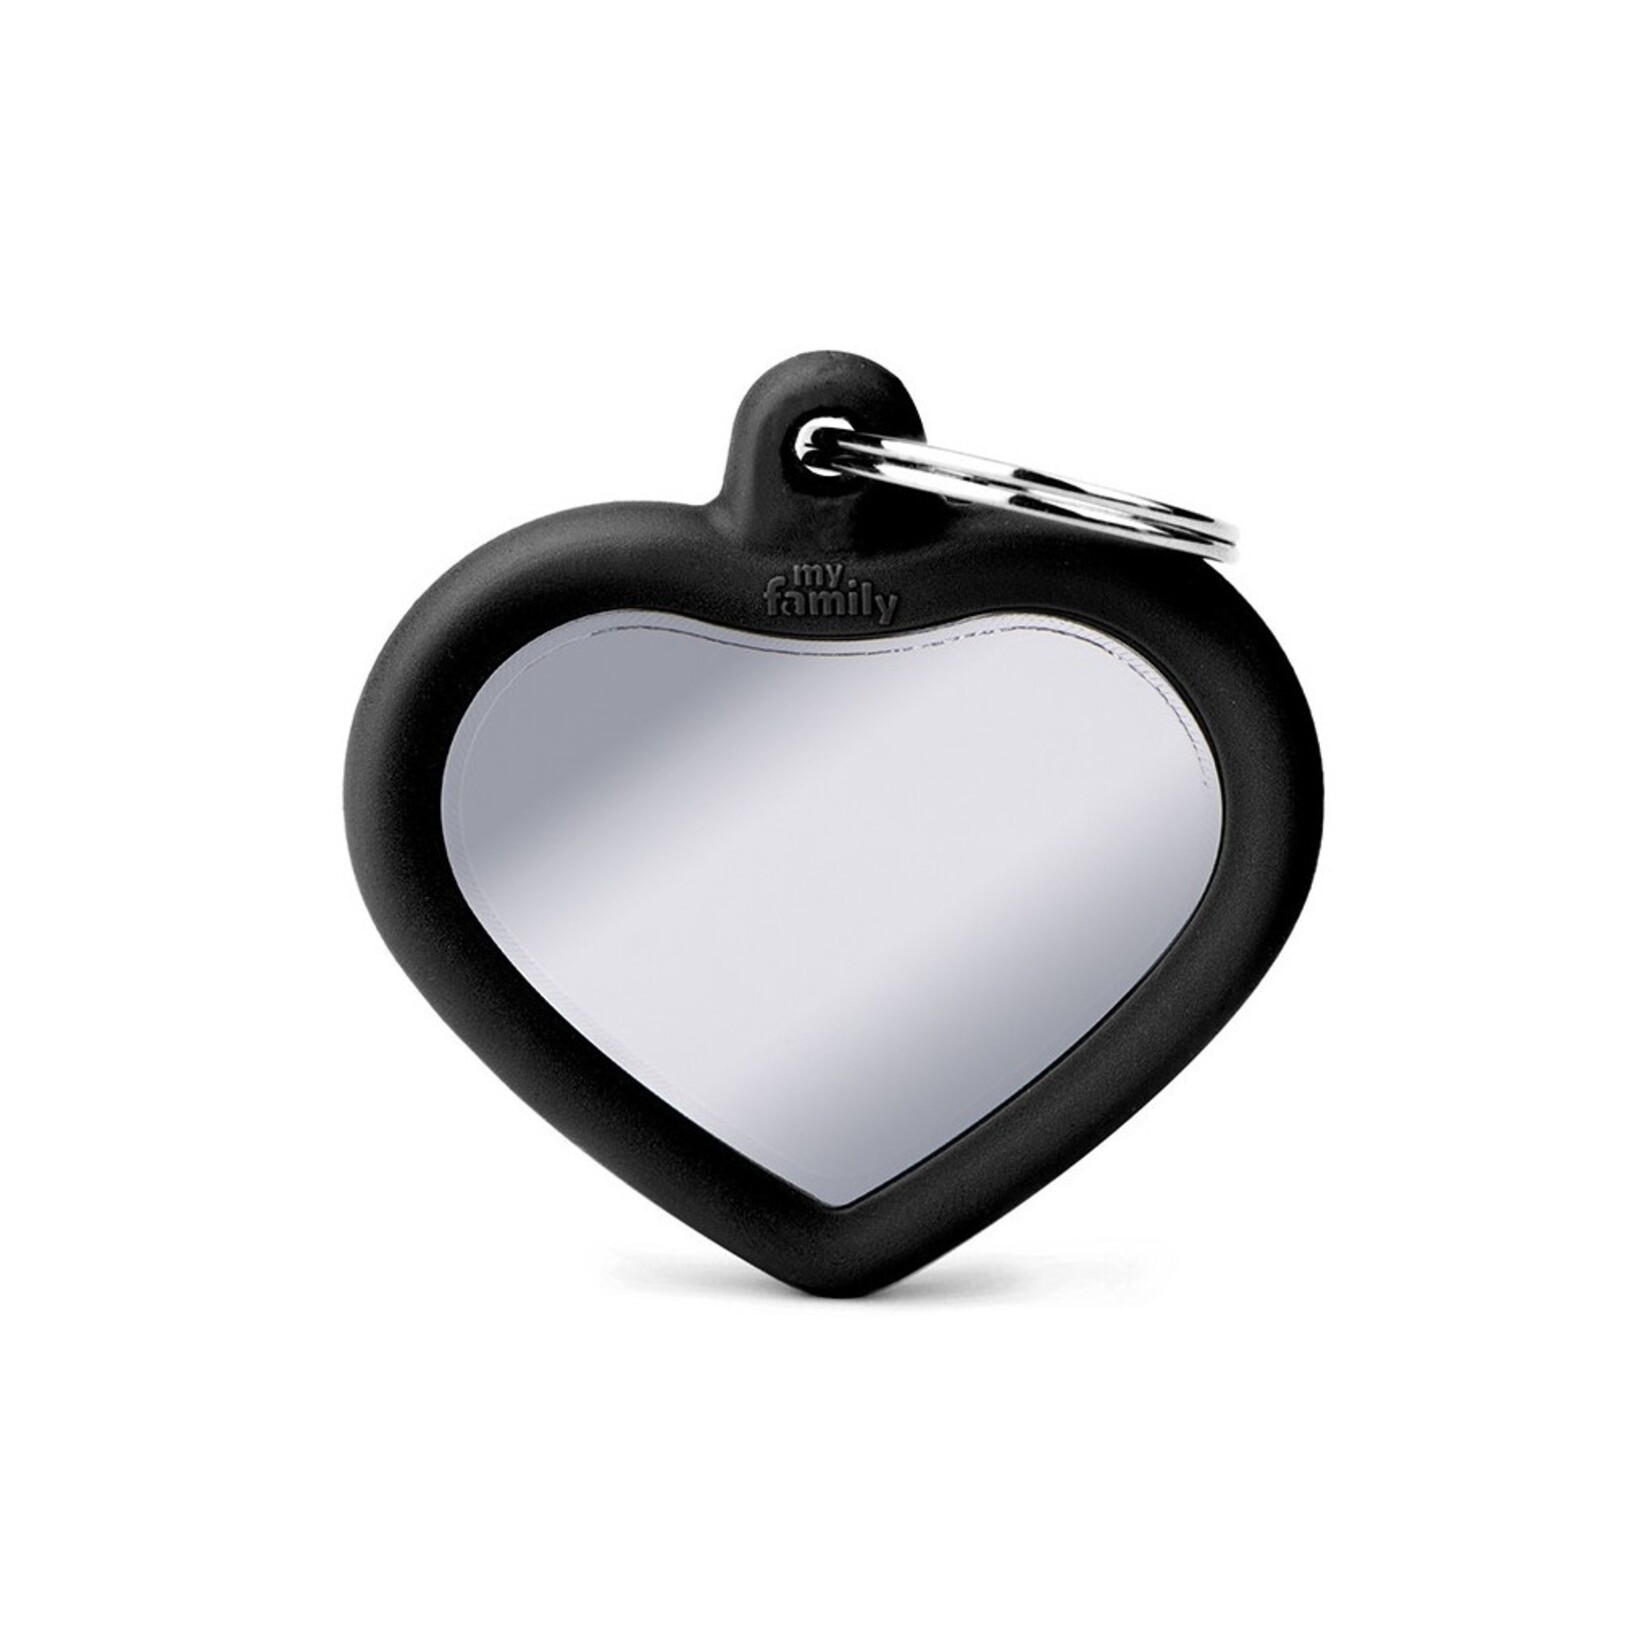 MyFamily MyFamily Hushtag Heart Chrome Plated Brass Black Rubber